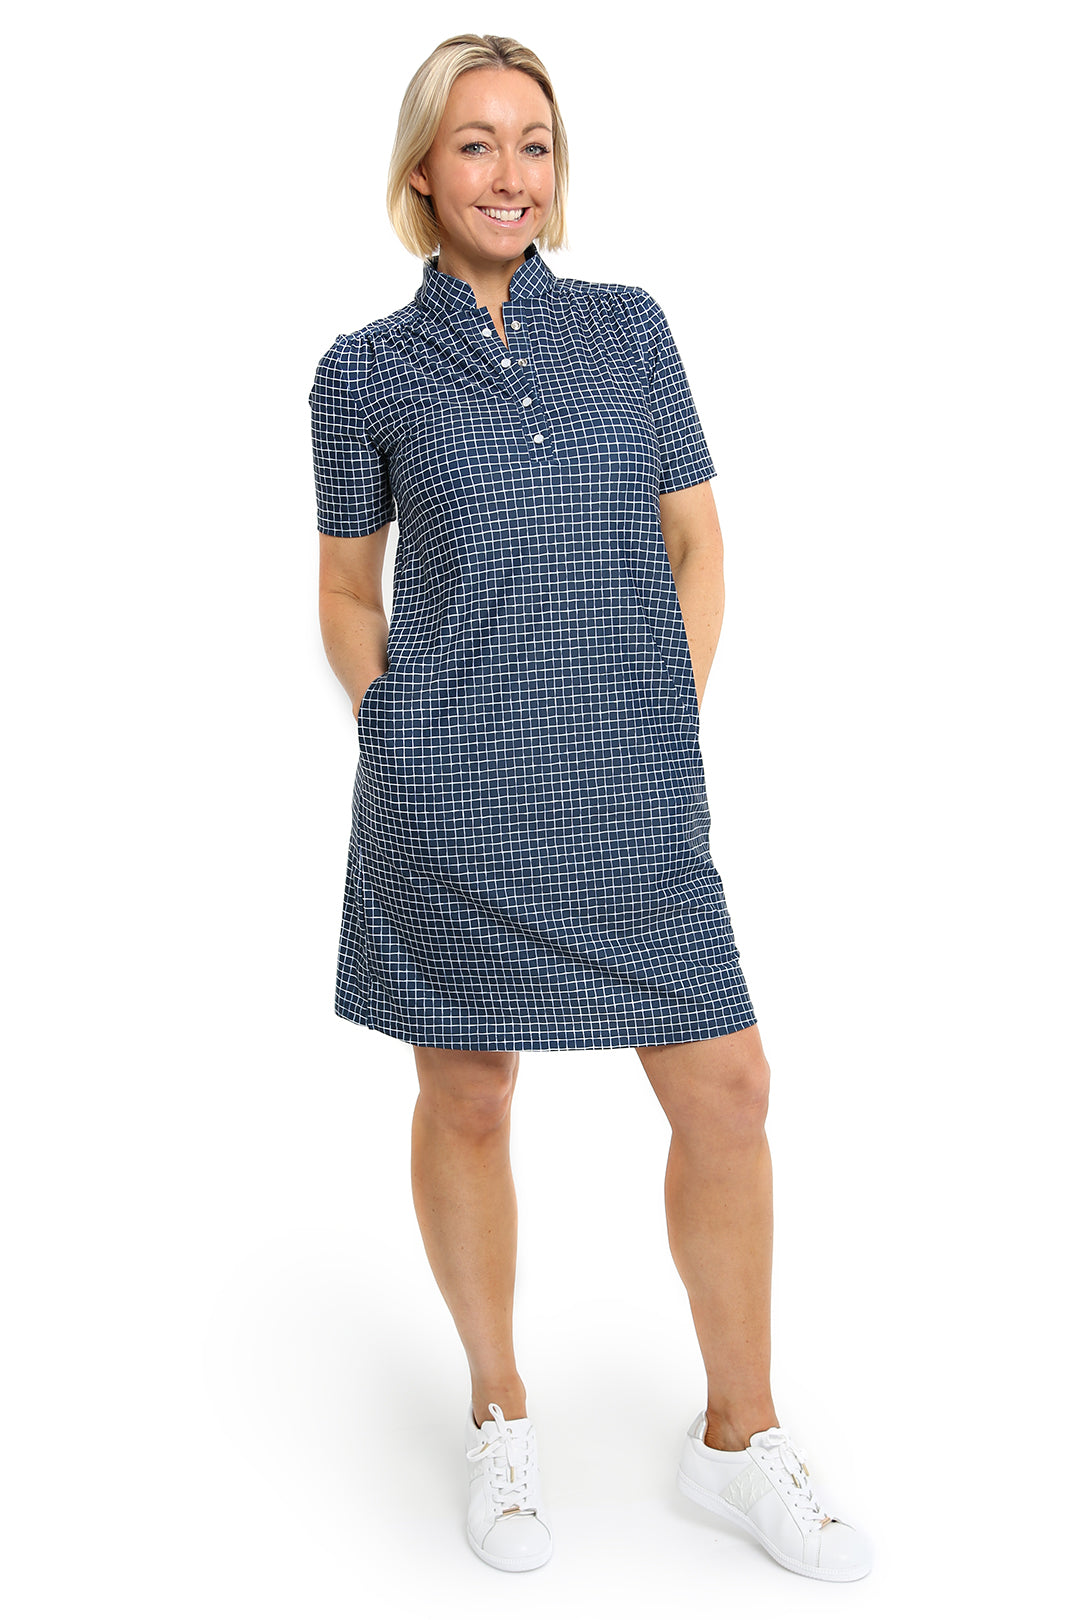 Brittany Golf Dress in Oxford – Swingactive